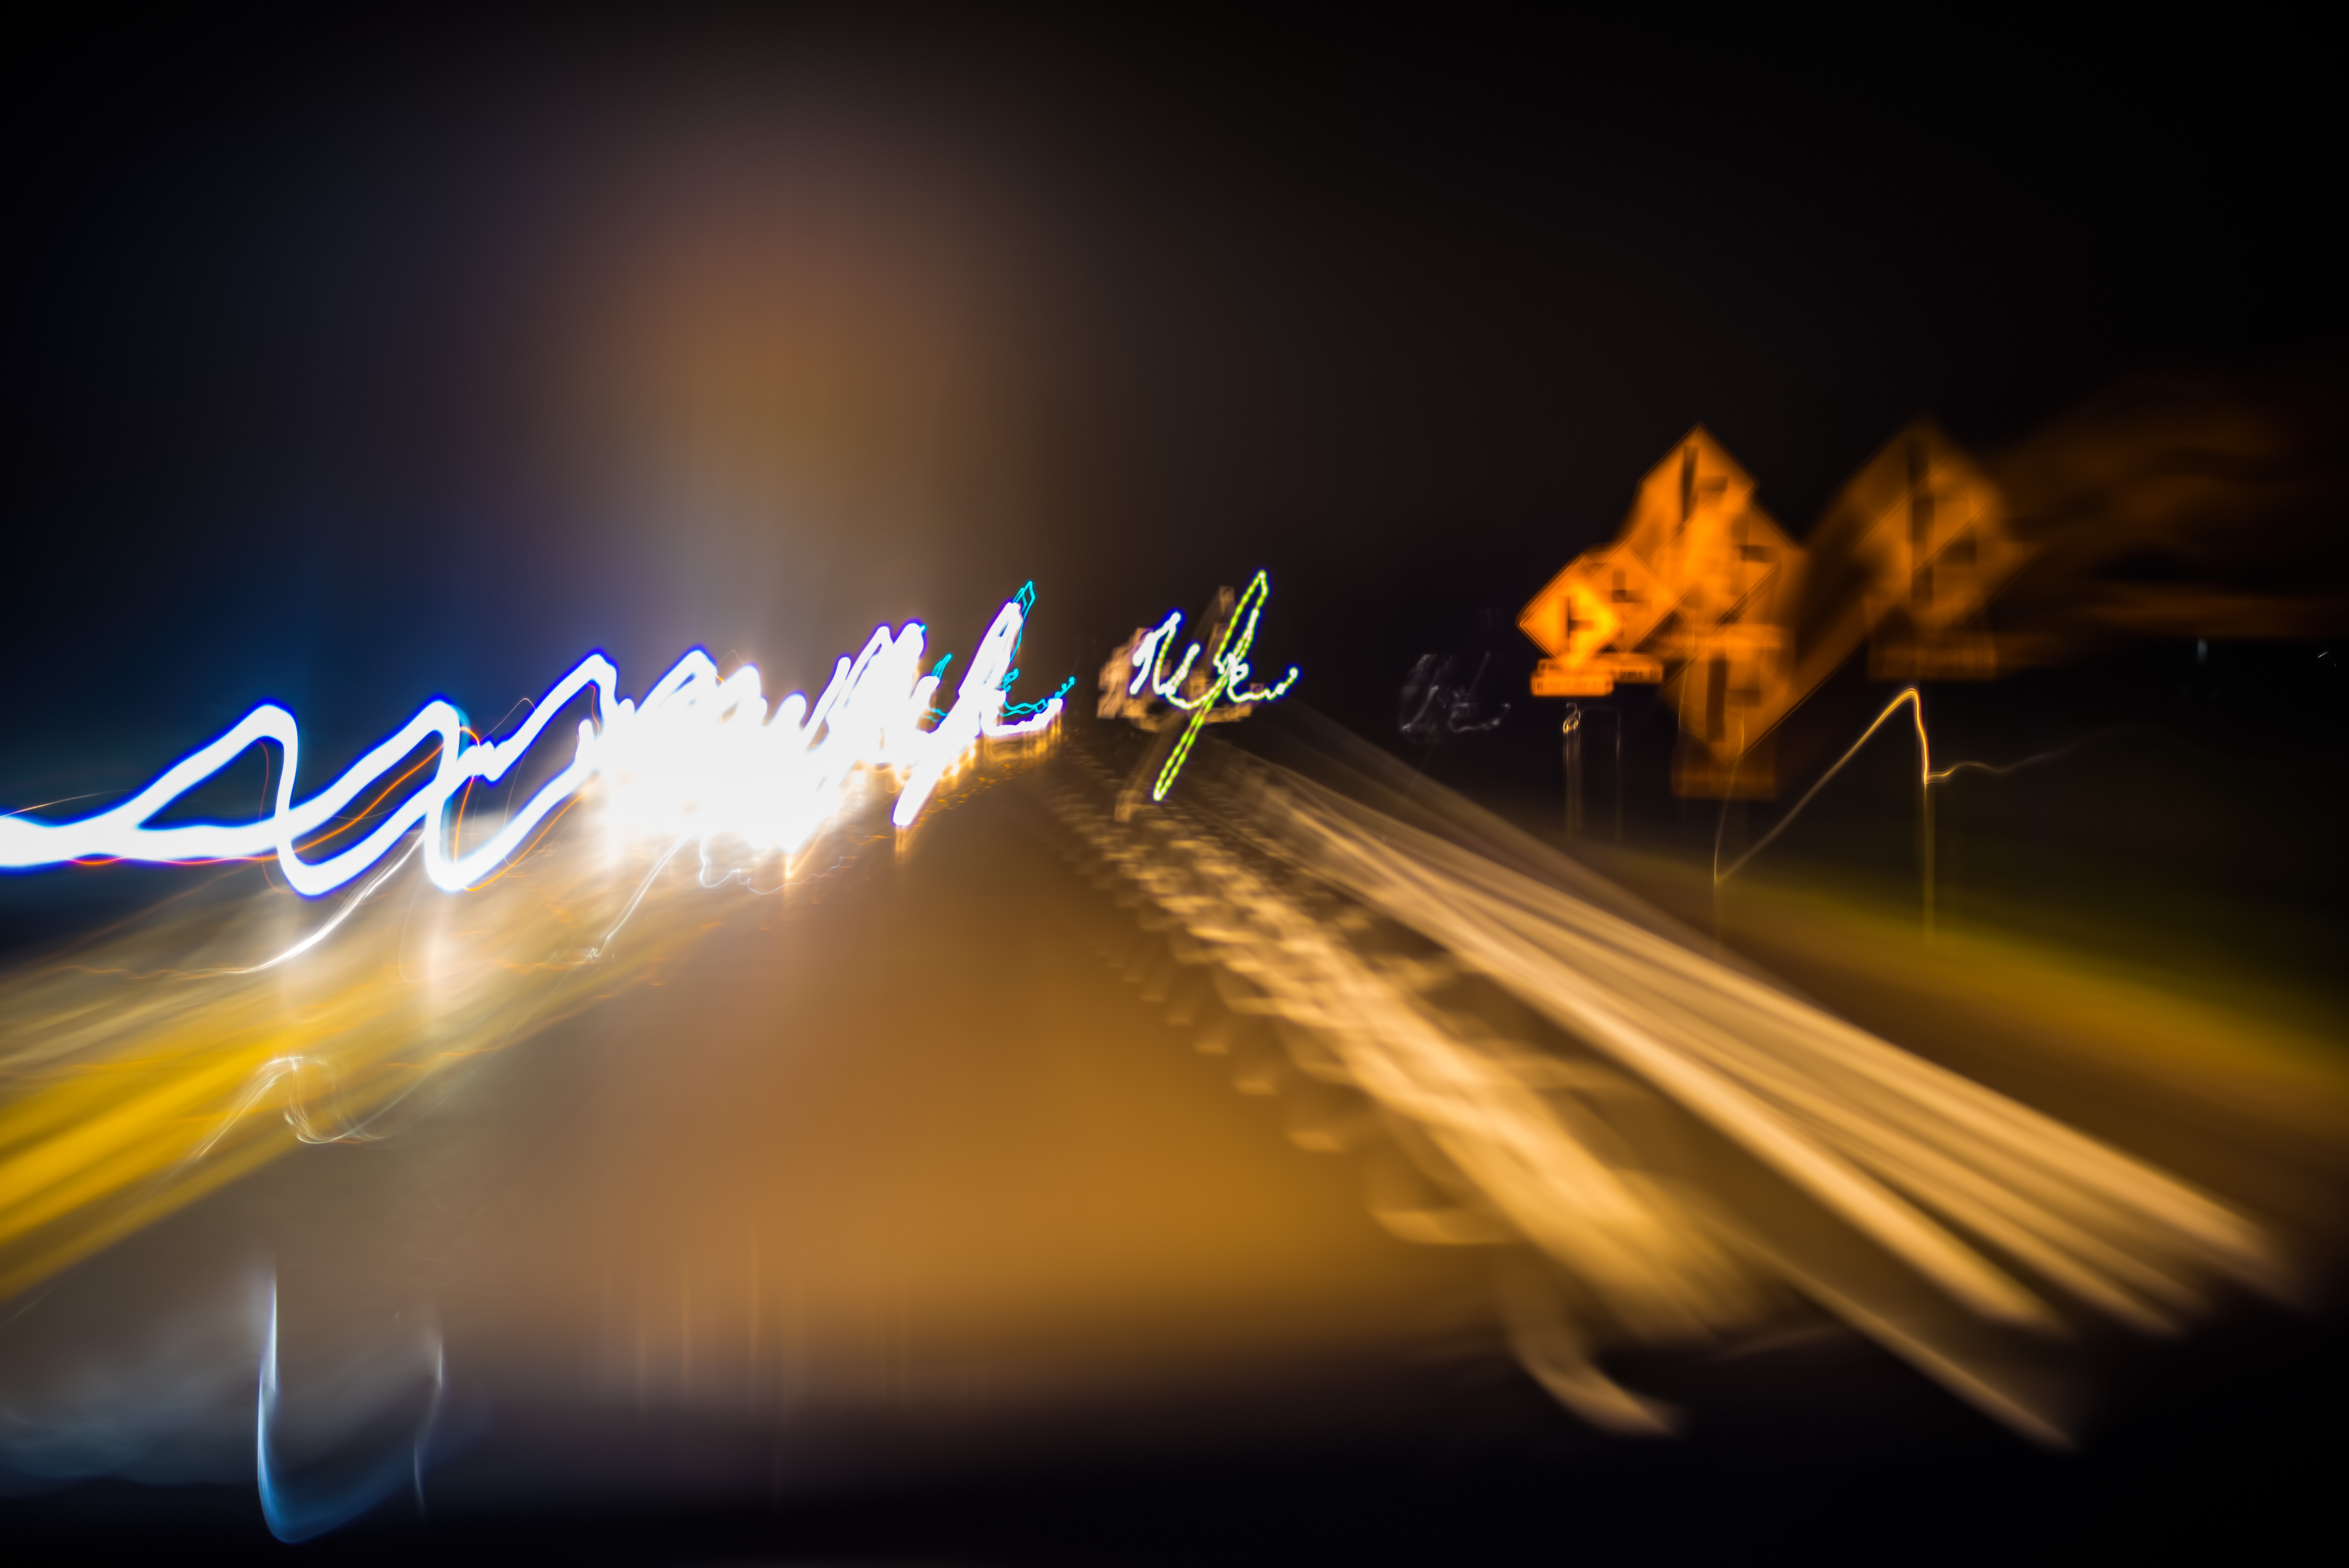 Blurred vision while driving at night, due to drug or alcohol impairment